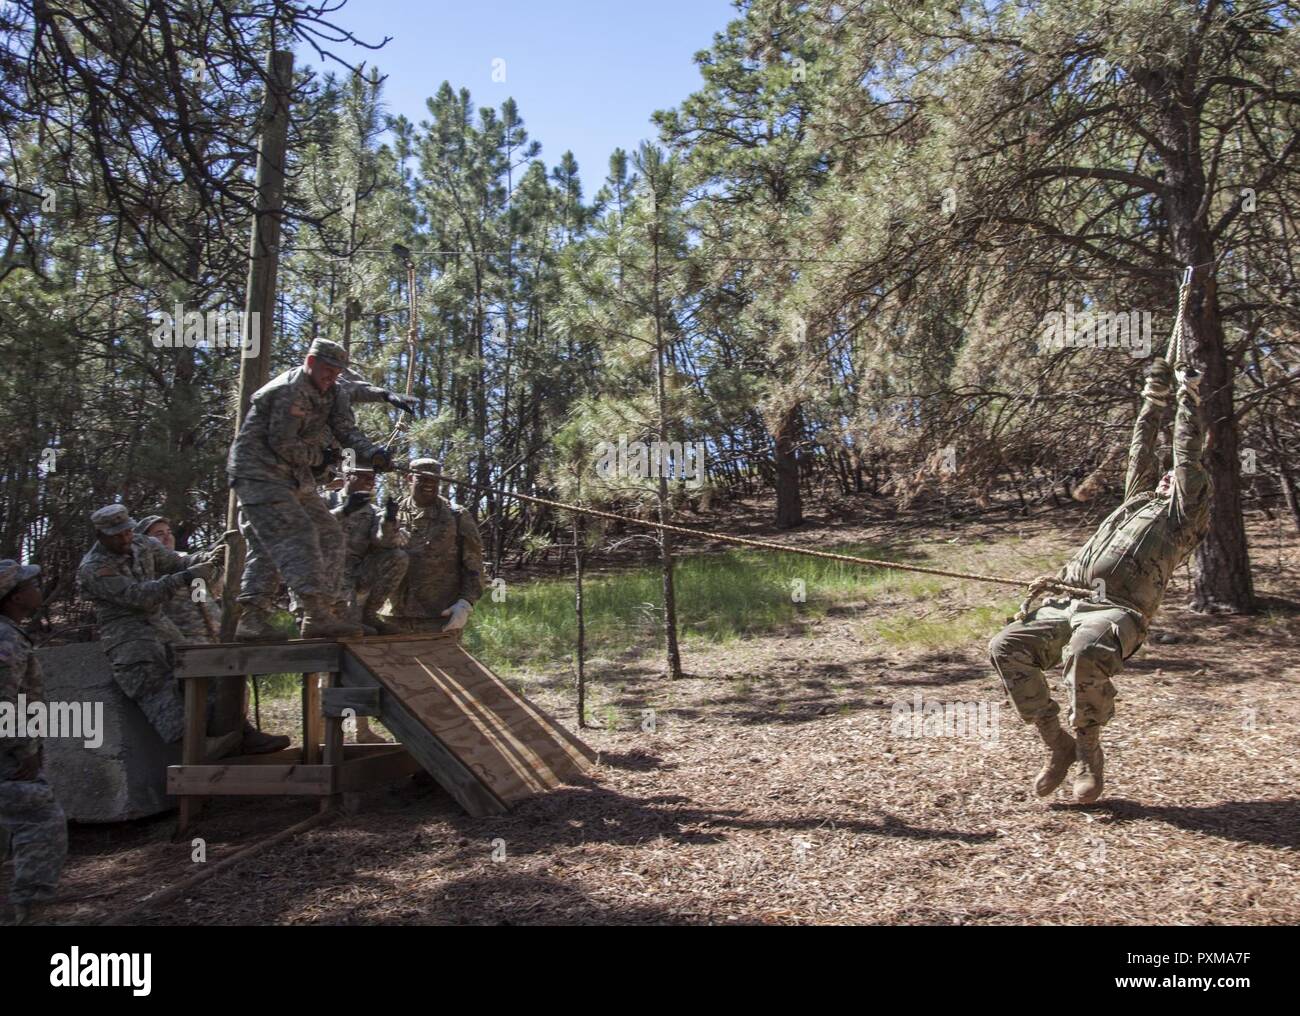 U.S. Soldiers with the 1138th Transportation Company, Missouri Army National Guard, pulls Spc. Brandon Hamilton across a rope bridge obstacle during the Leadership Reaction Course in support of the Golden Coyote exercise at West Camp Rapid, S.D., June 13, 2017. The Golden Coyote exercise is a three-phase, scenario-driven exercise conducted in the Black Hills of South Dakota and Wyoming, which enables commanders to focus on mission essential task requirements, warrior tasks and battle drills. Stock Photo